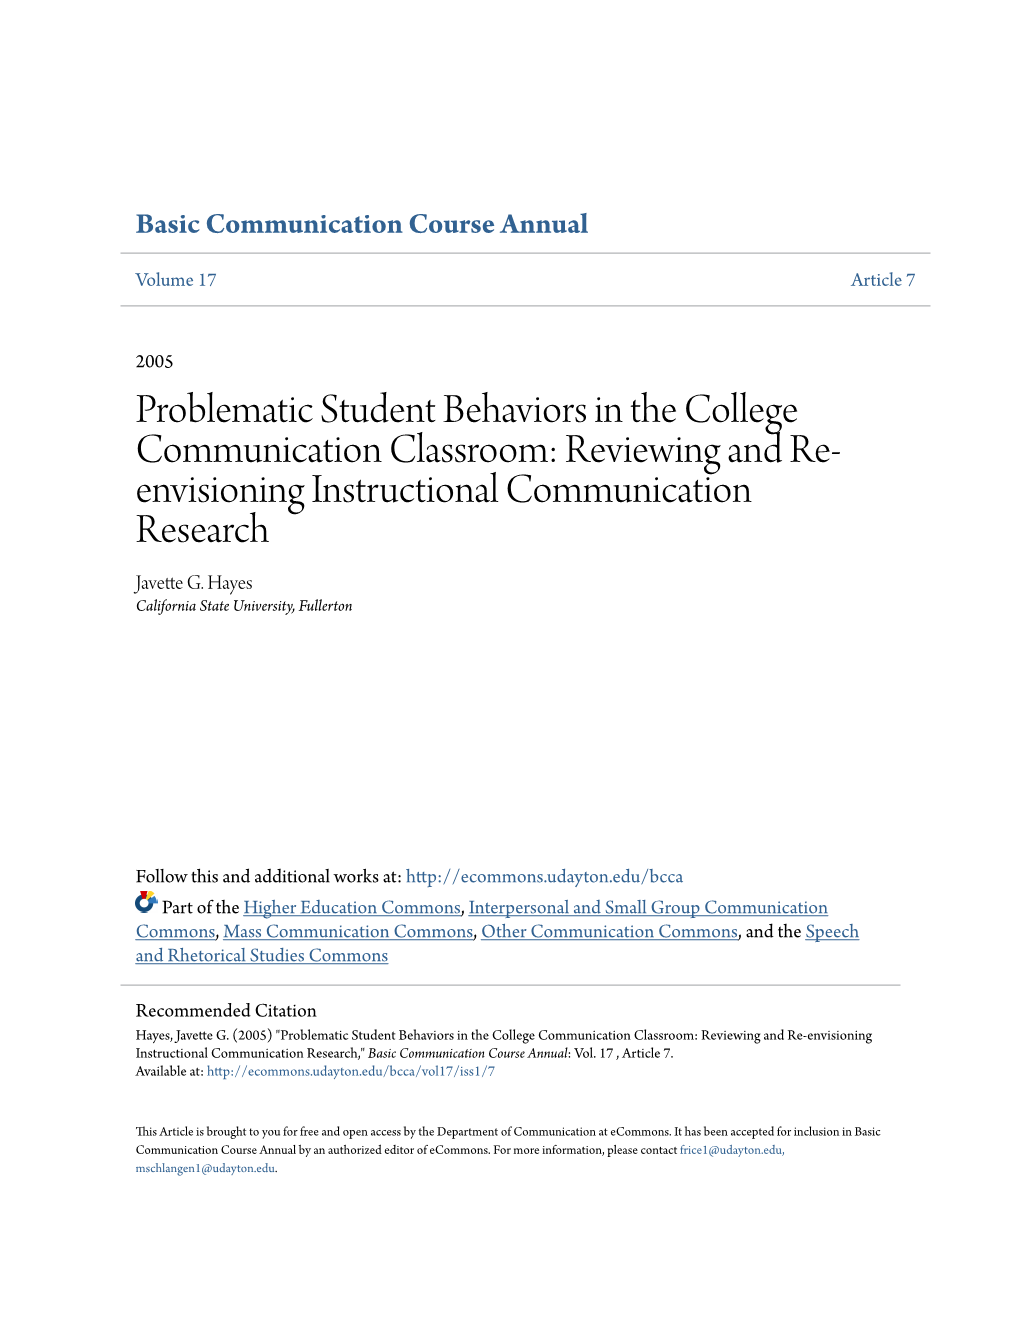 Problematic Student Behaviors in the College Communication Classroom: Reviewing and Re- Envisioning Instructional Communication Research Javette G